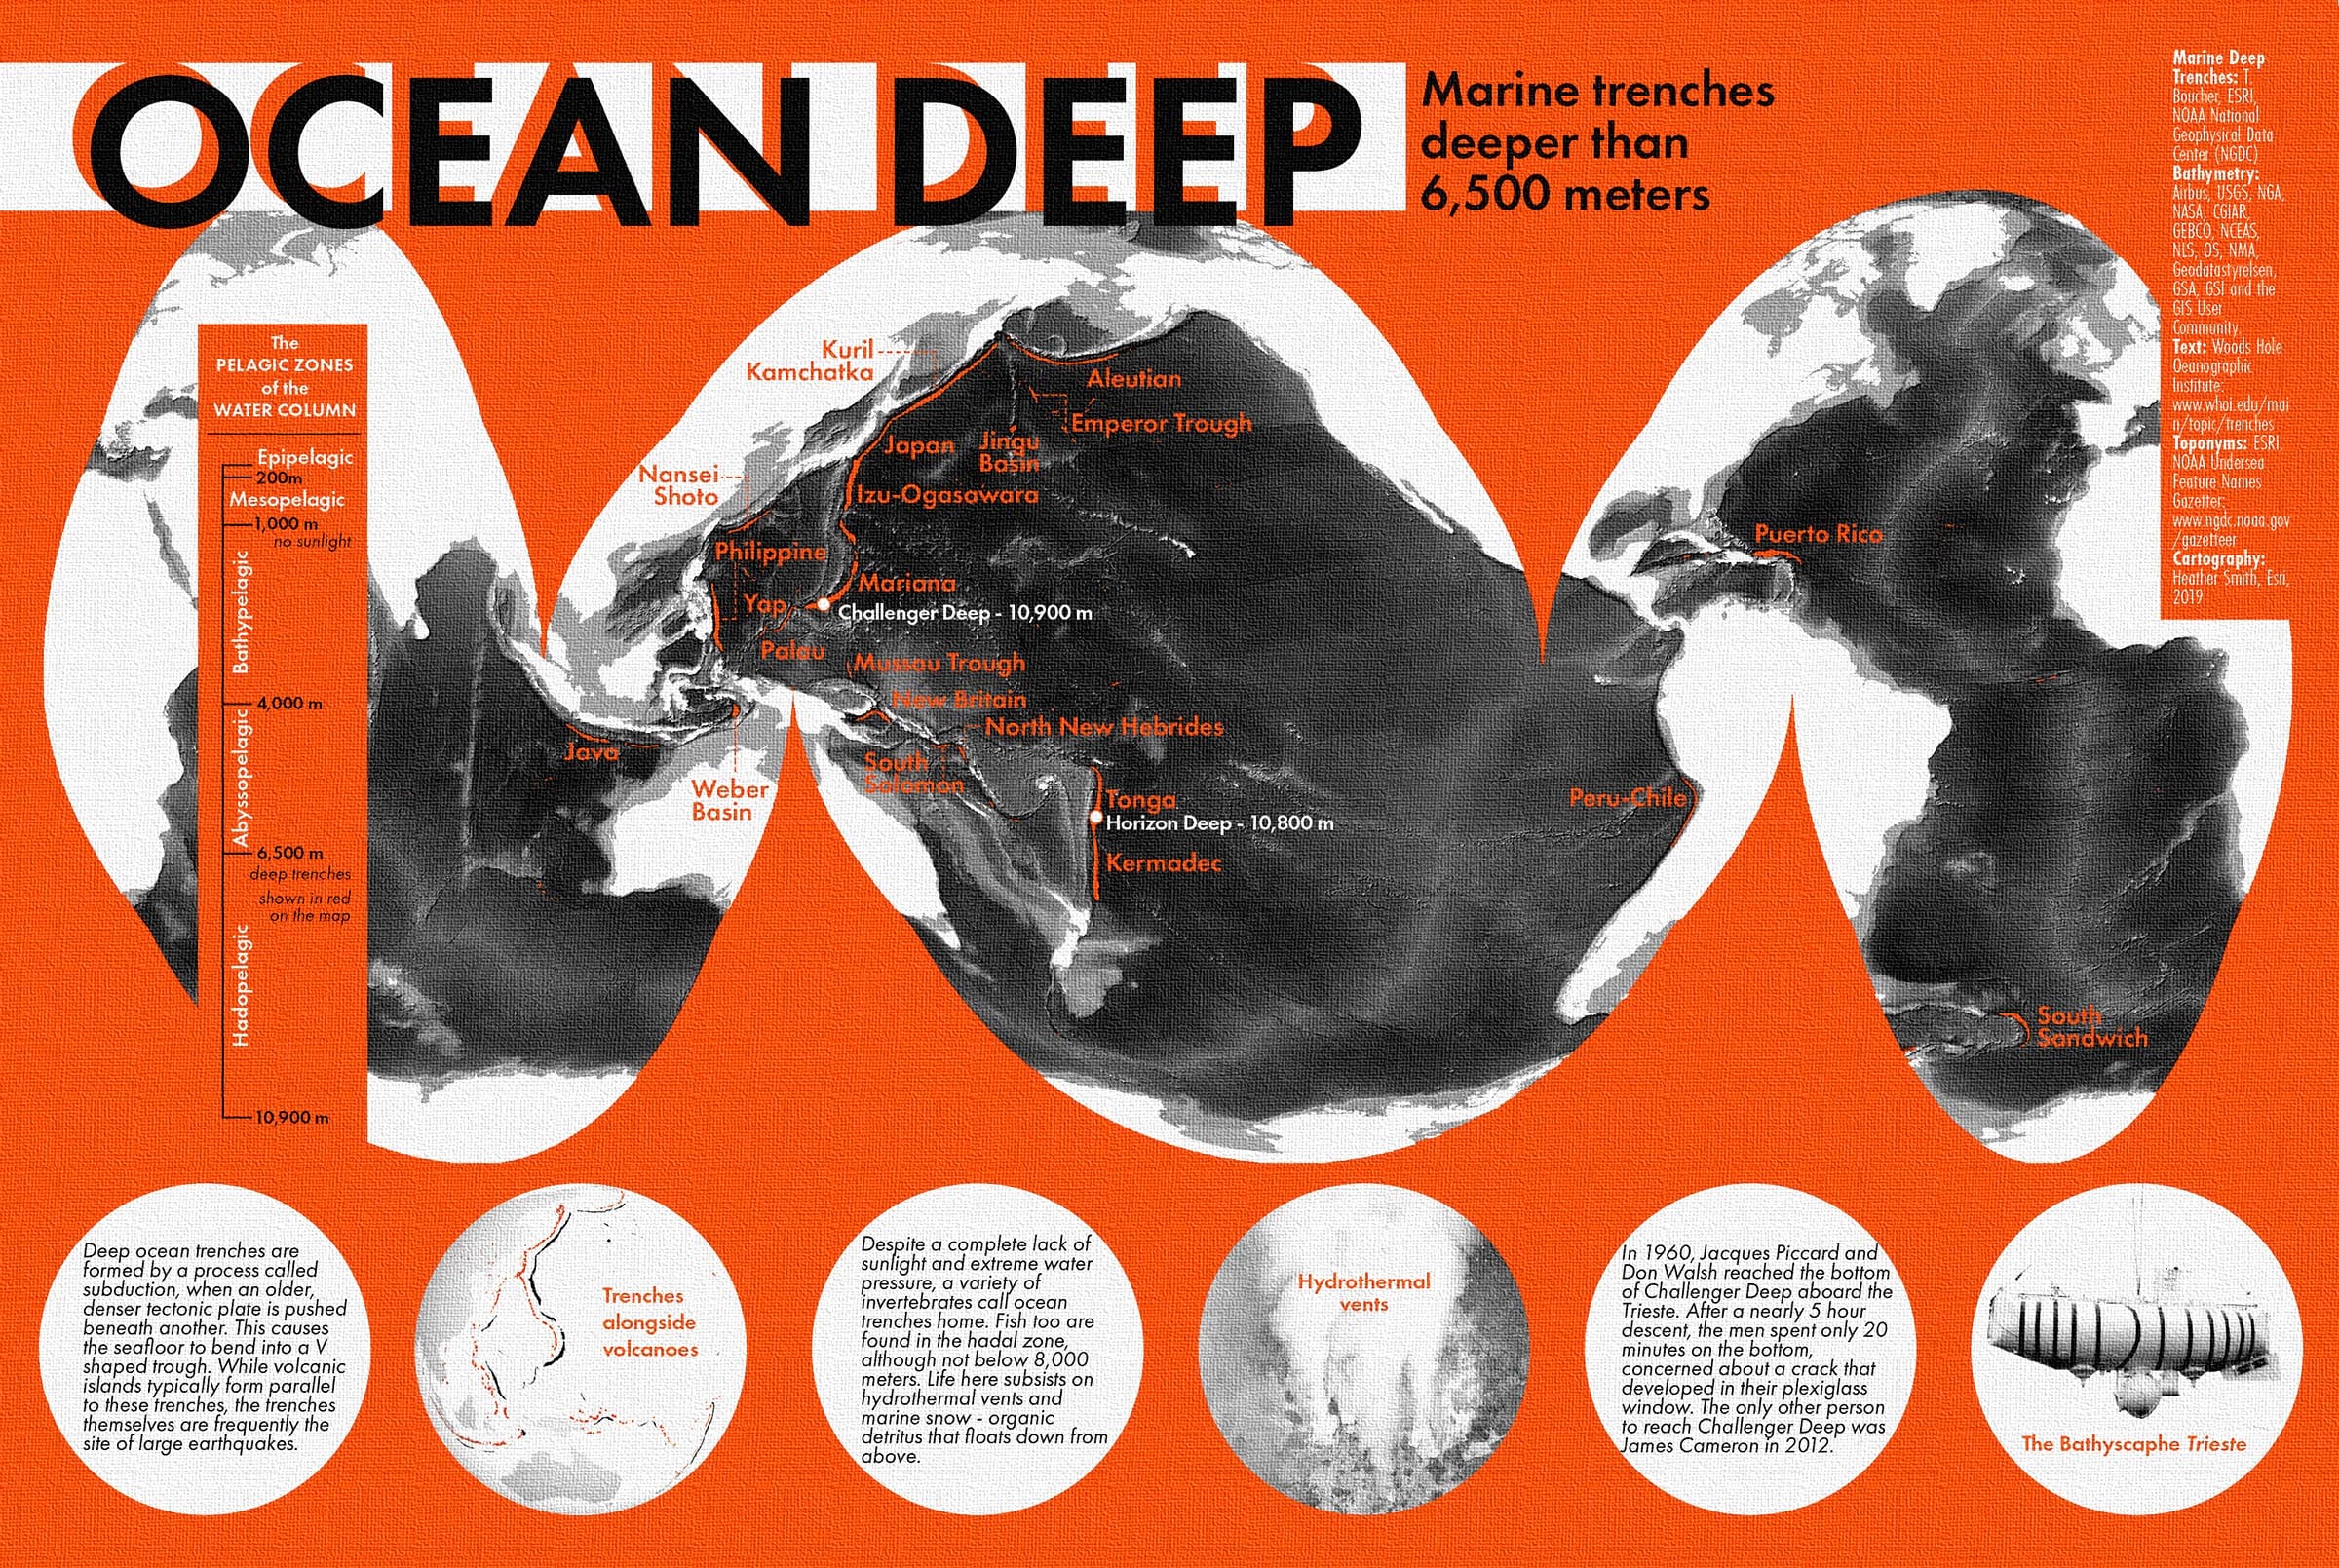 Textbook-inspired map of ocean trenches